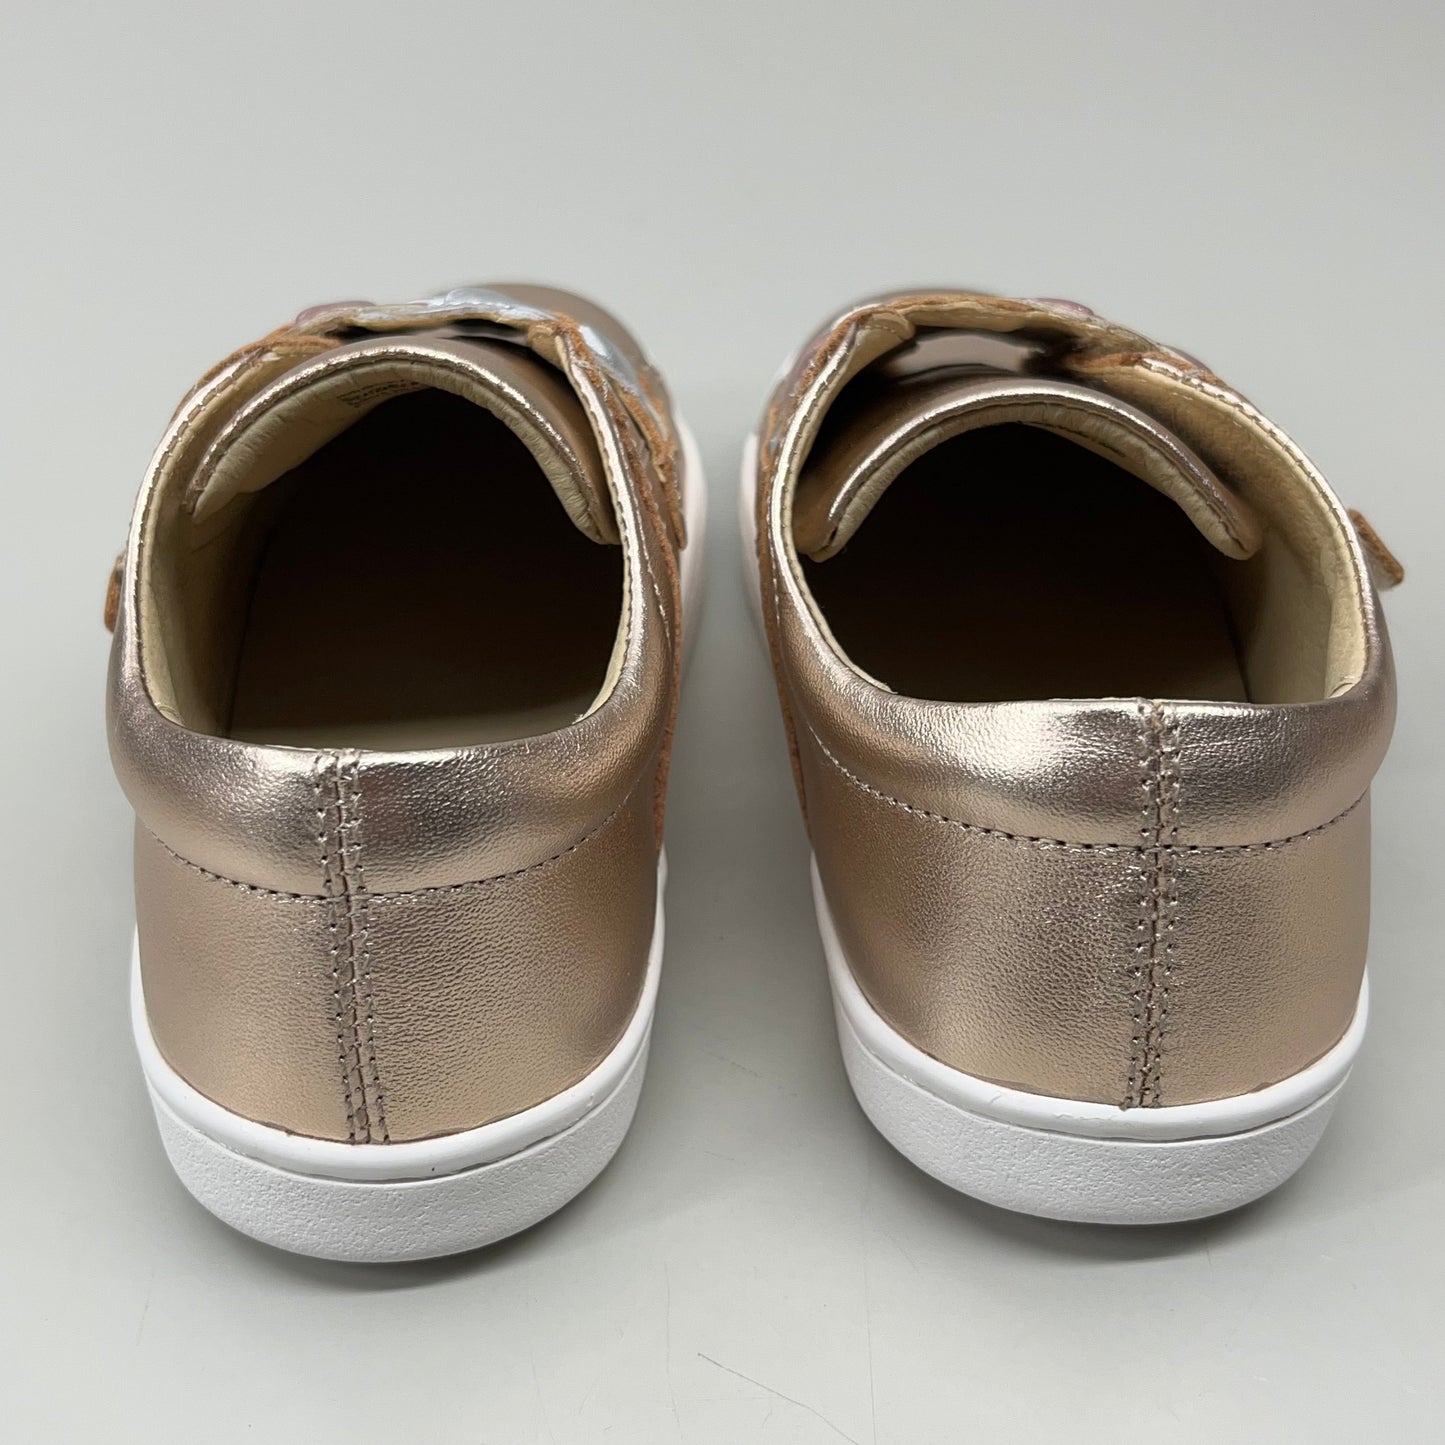 OLD SOLES Igster Sneakers Kid's Leather Shoe Sz 23 US 7 Copper/Silver/Pink Frost #6132